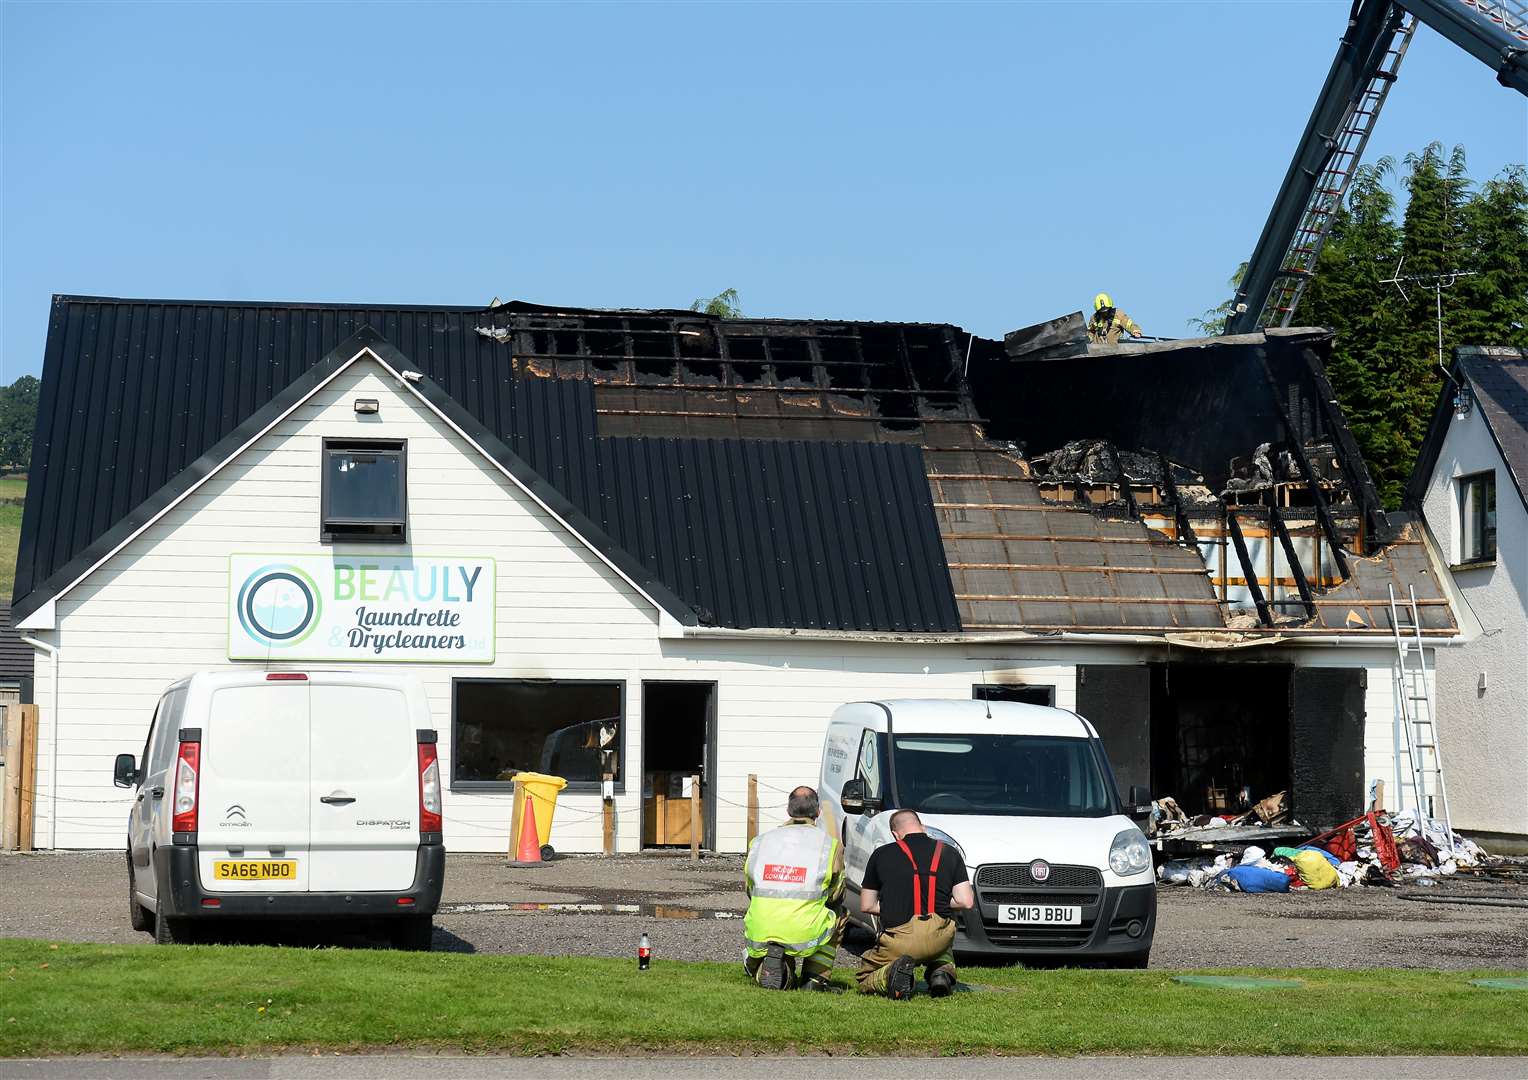 The fire-hit laundry building was later demolished and the site cleared.